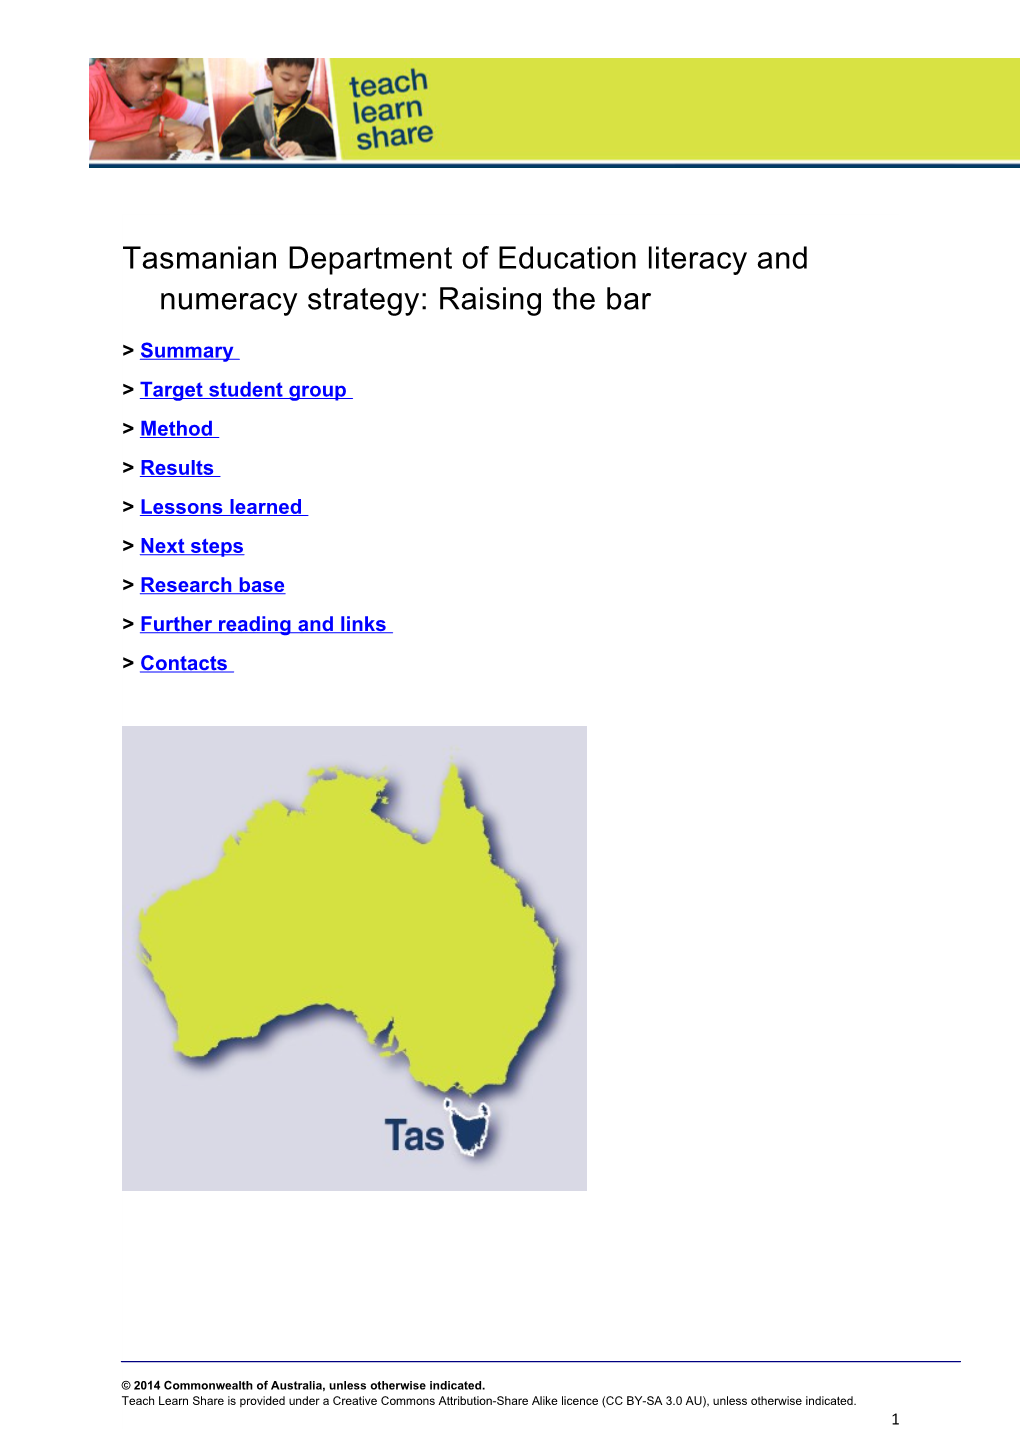 Tasmanian Department of Education Literacy and Numeracy Strategy: Raising the Bar